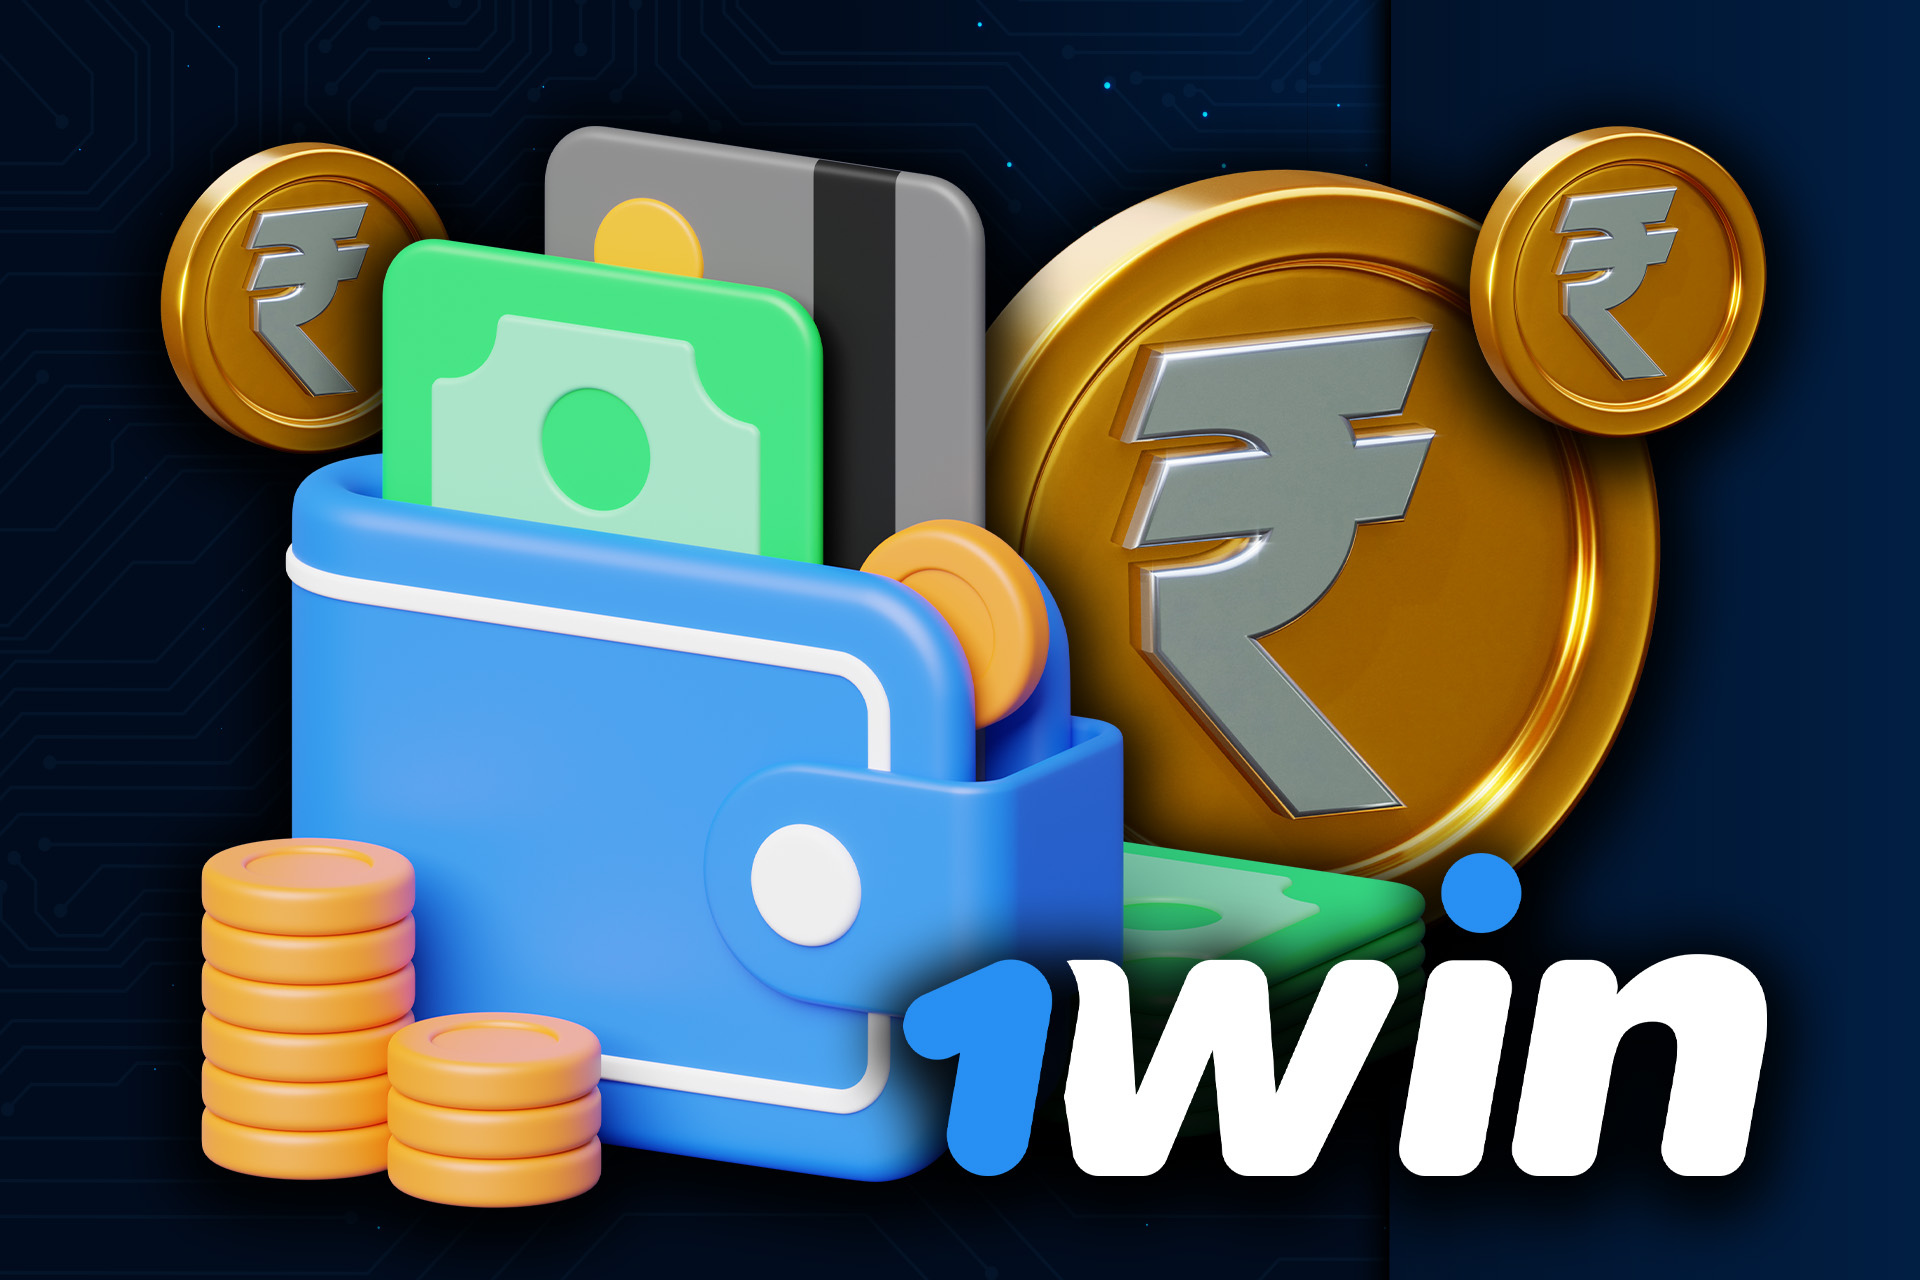 1win has several methods for withdrawing money.